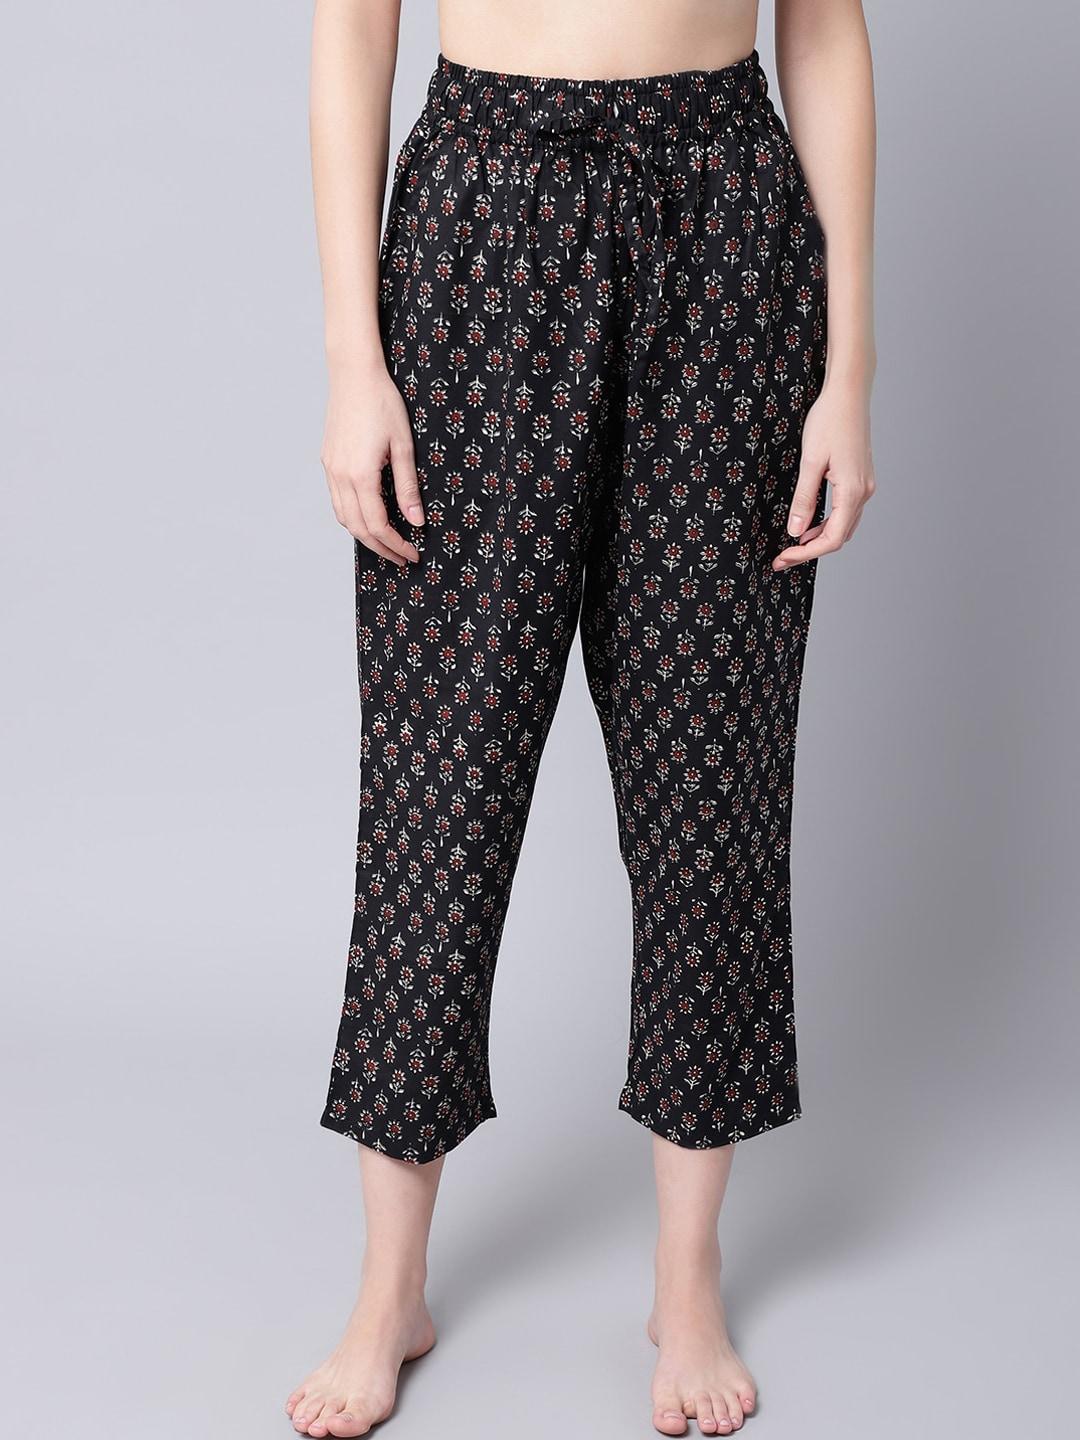 TAG 7 Women Black & Maroon Printed Cotton Comfort-Fit Lounge Pant